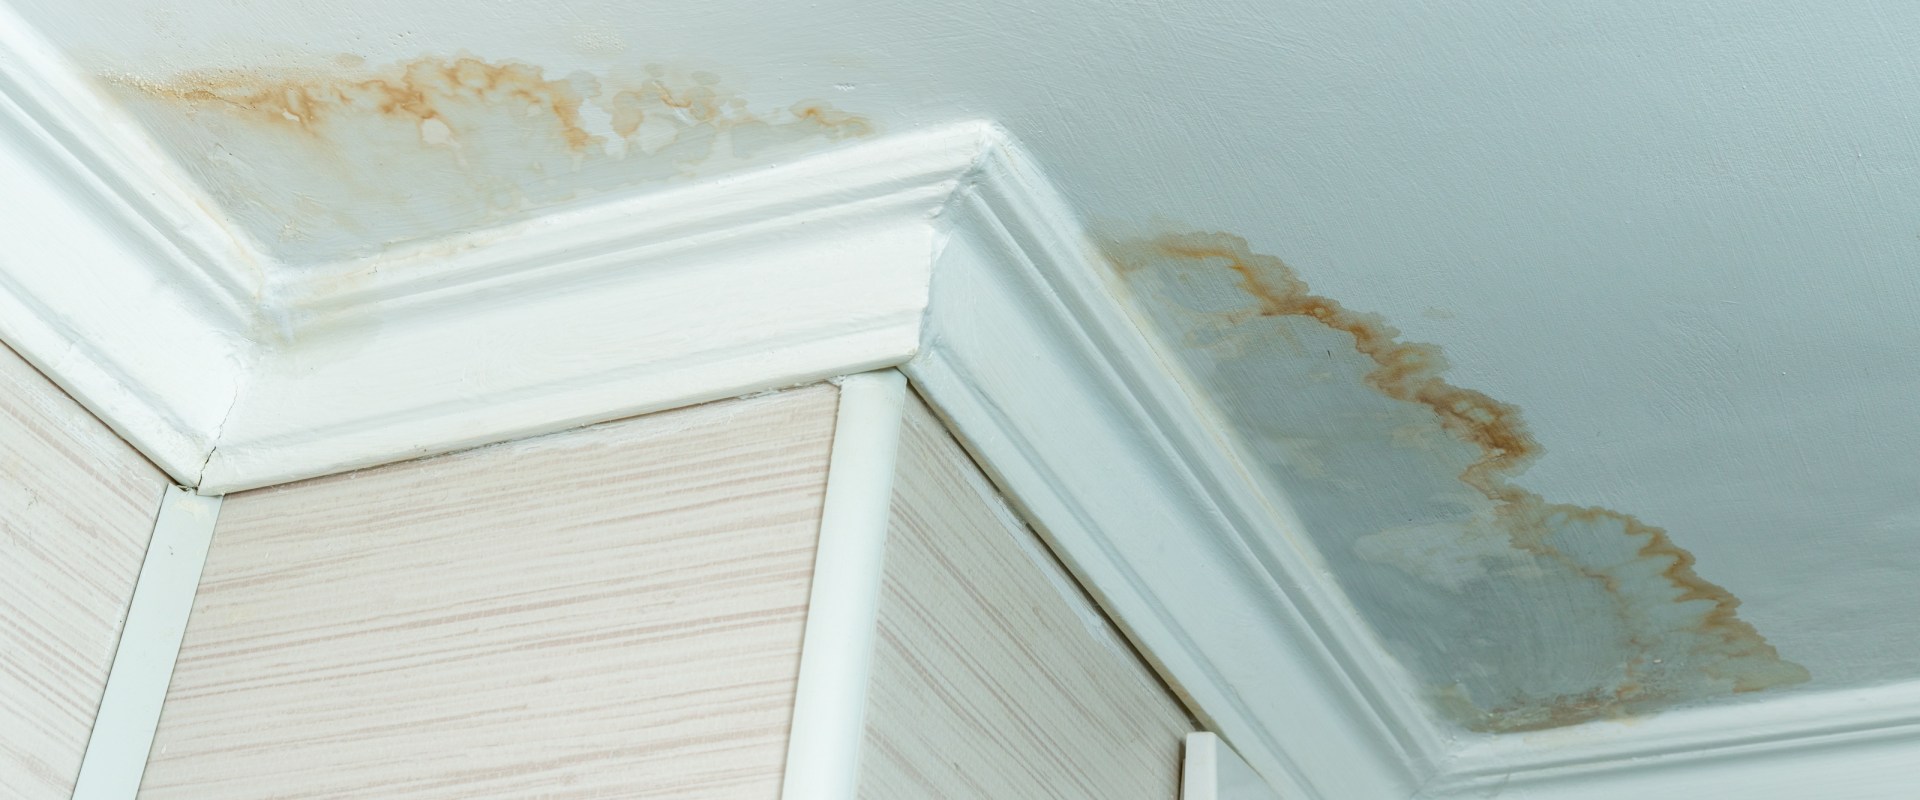 Can You Cover Water Damage with Paint?